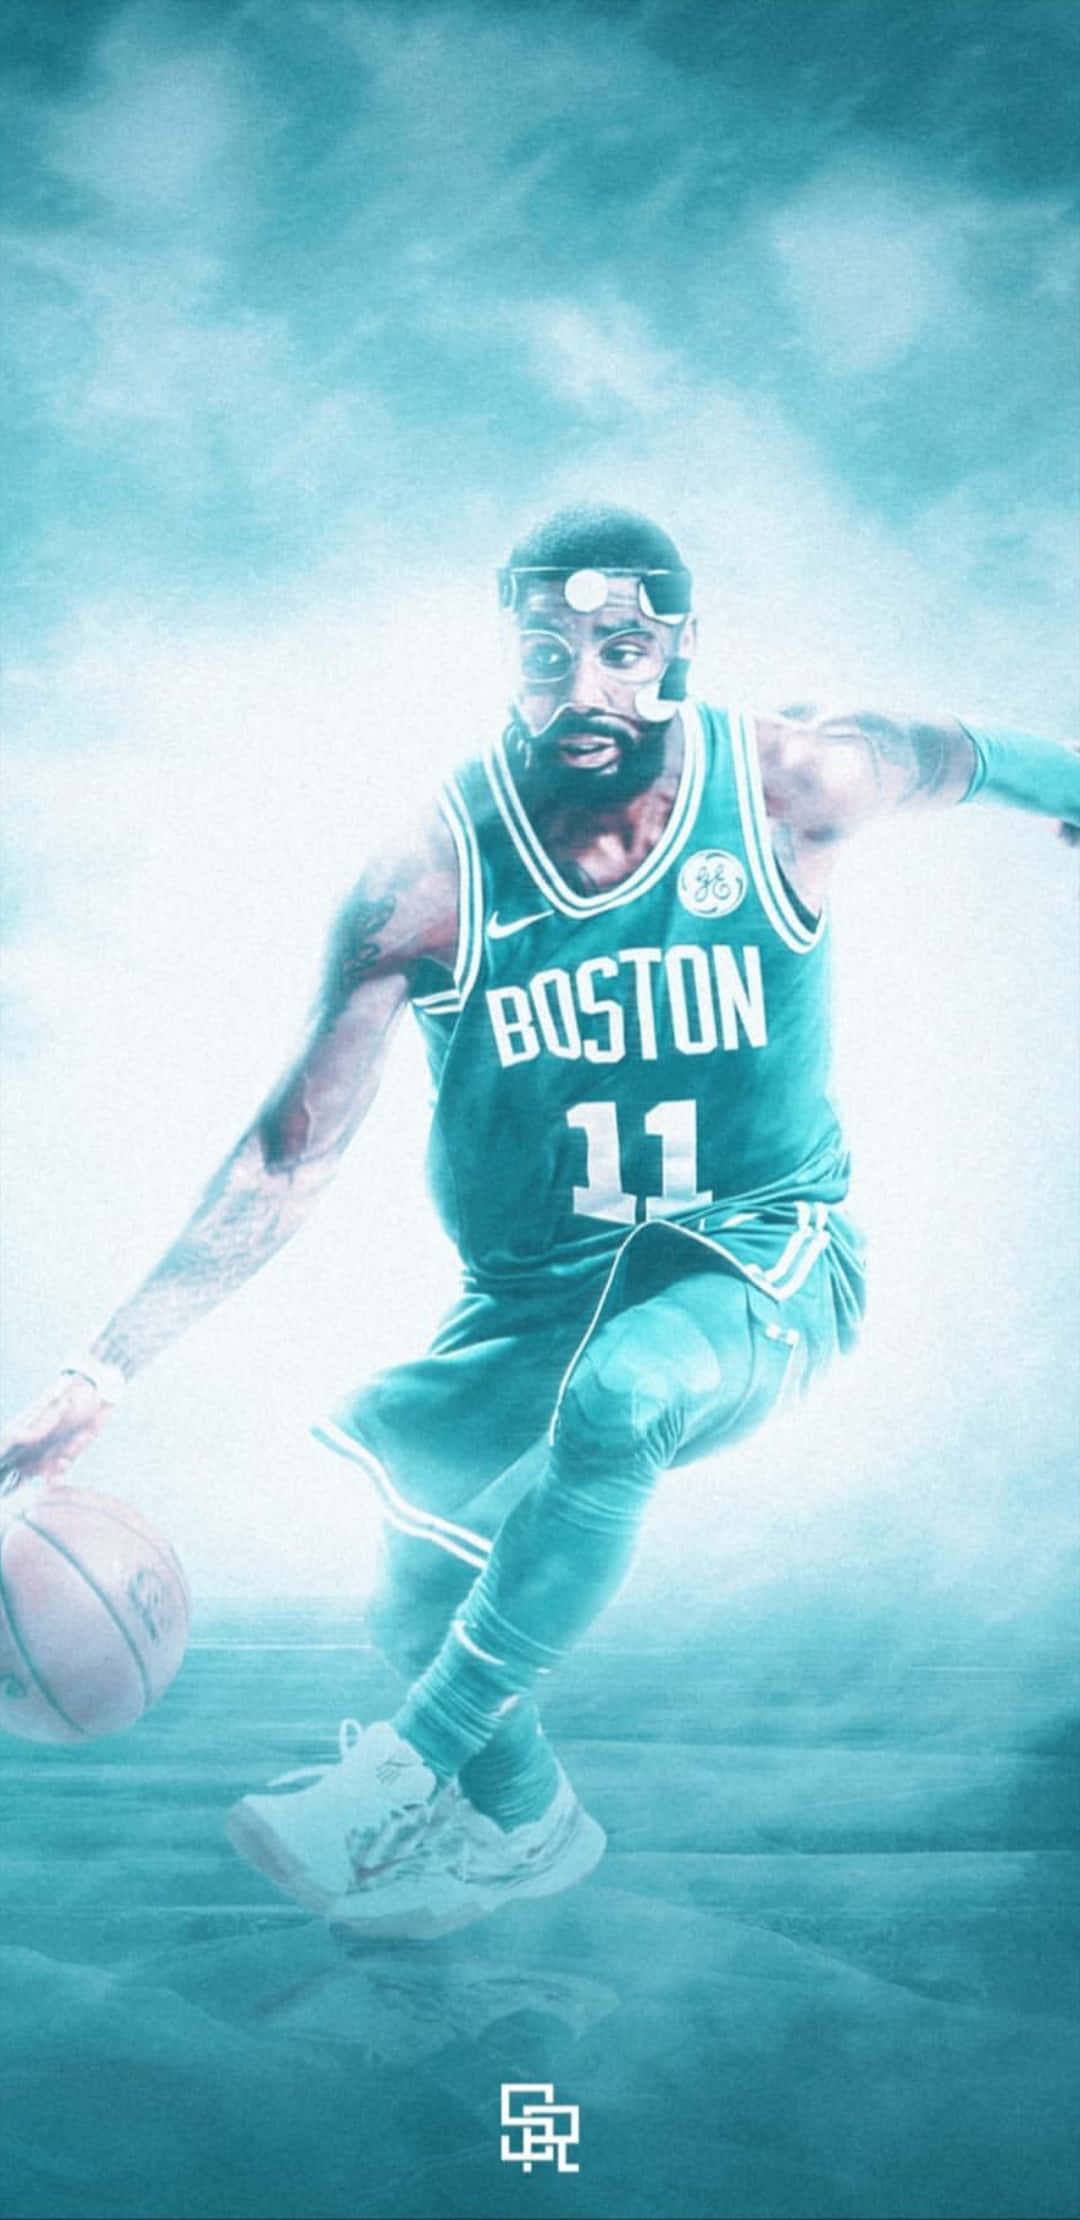 Creative  Kyrie Irving. Cool as a cucumber and ready for the game. Wallpaper